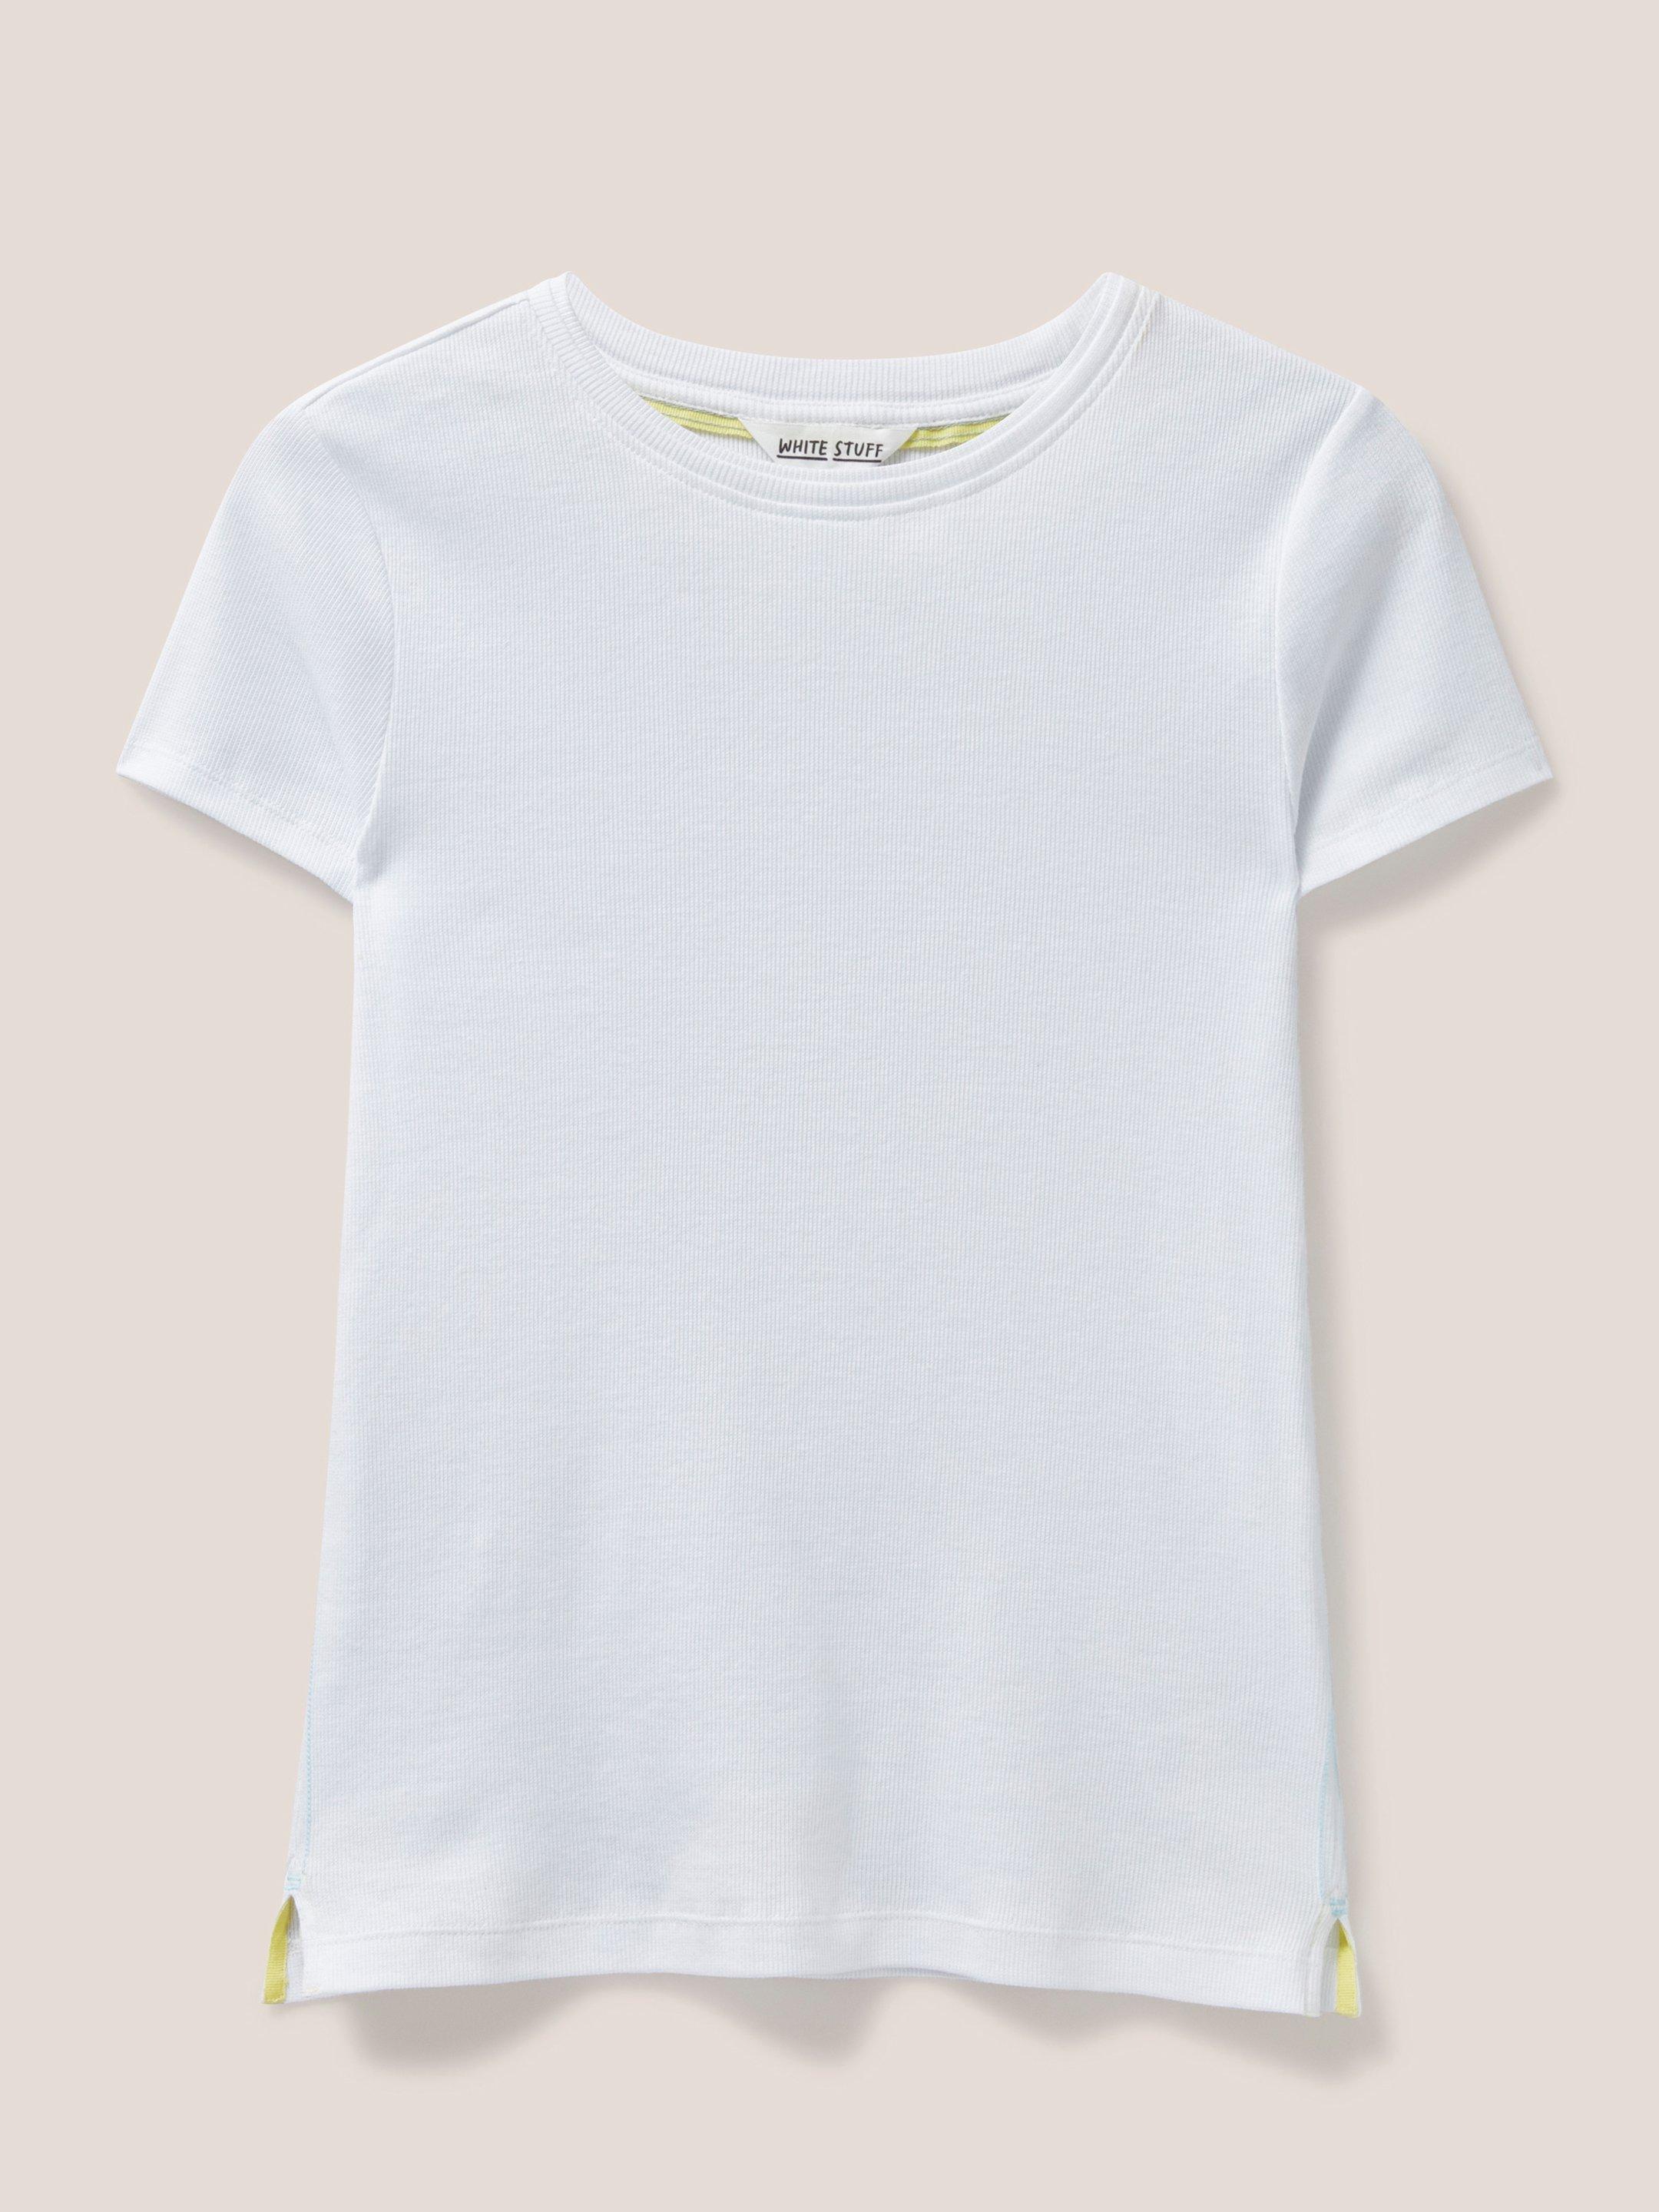 AIDA CAP SLEEVE TEE in BRIL WHITE - FLAT FRONT